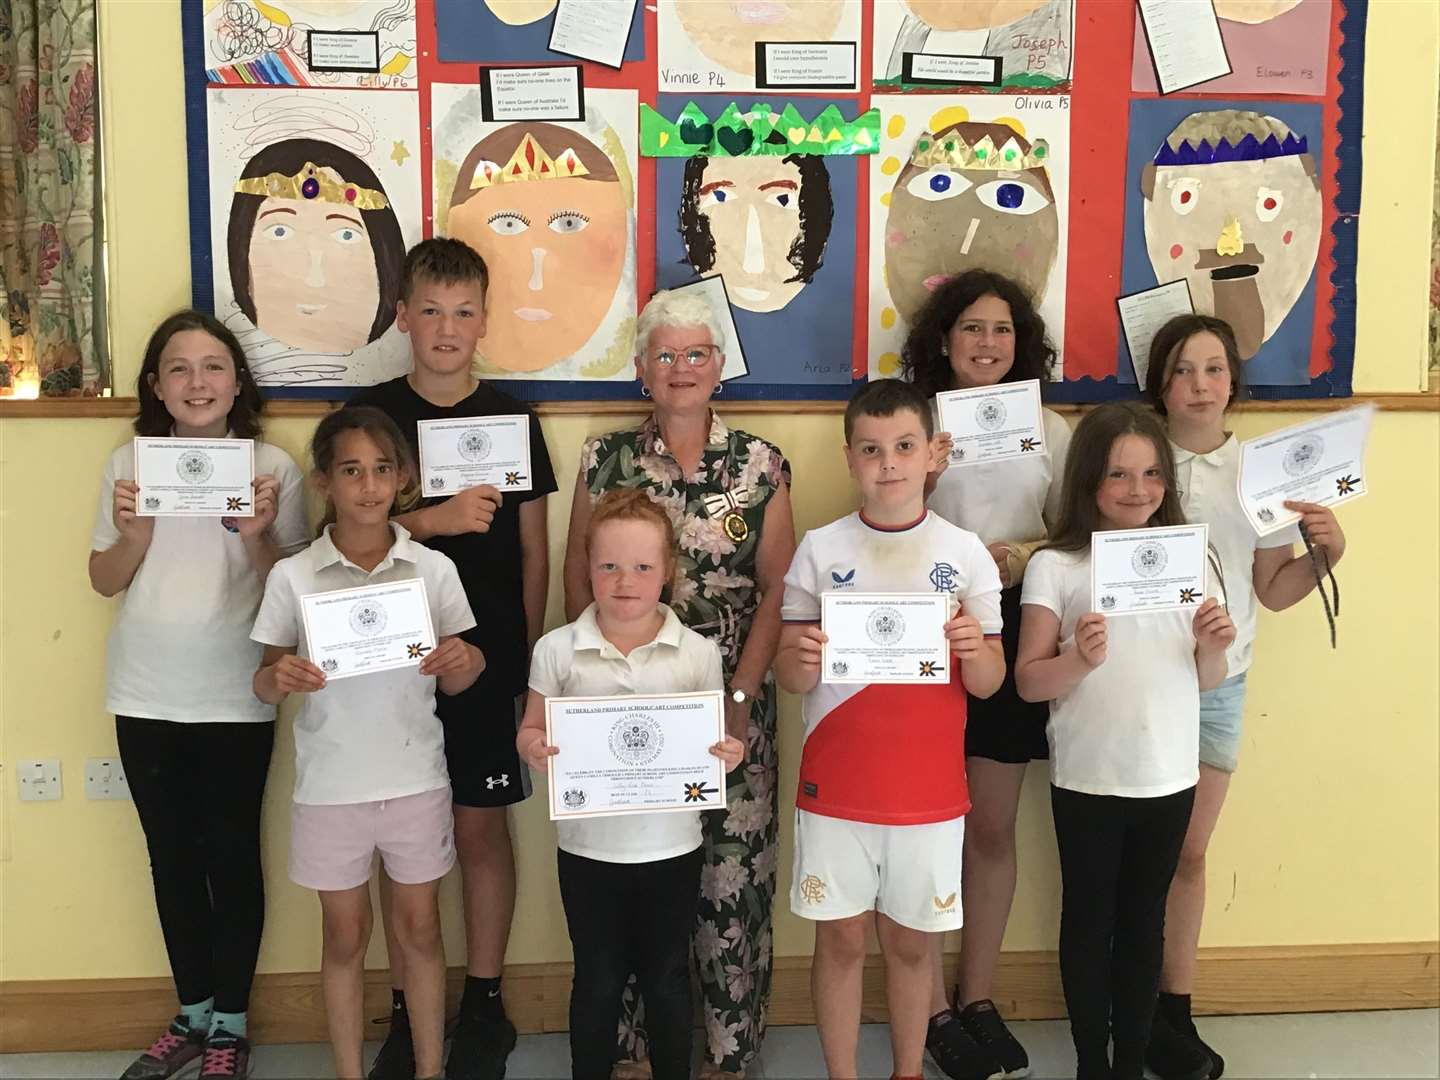 The pupils at Gledfield Primary School were given their certificates by Deputy Lieutenant Christine Mackay. The p1-3 class was won by Lily-Rose Shaw and the p4-7 class by Annabelle Macrae.